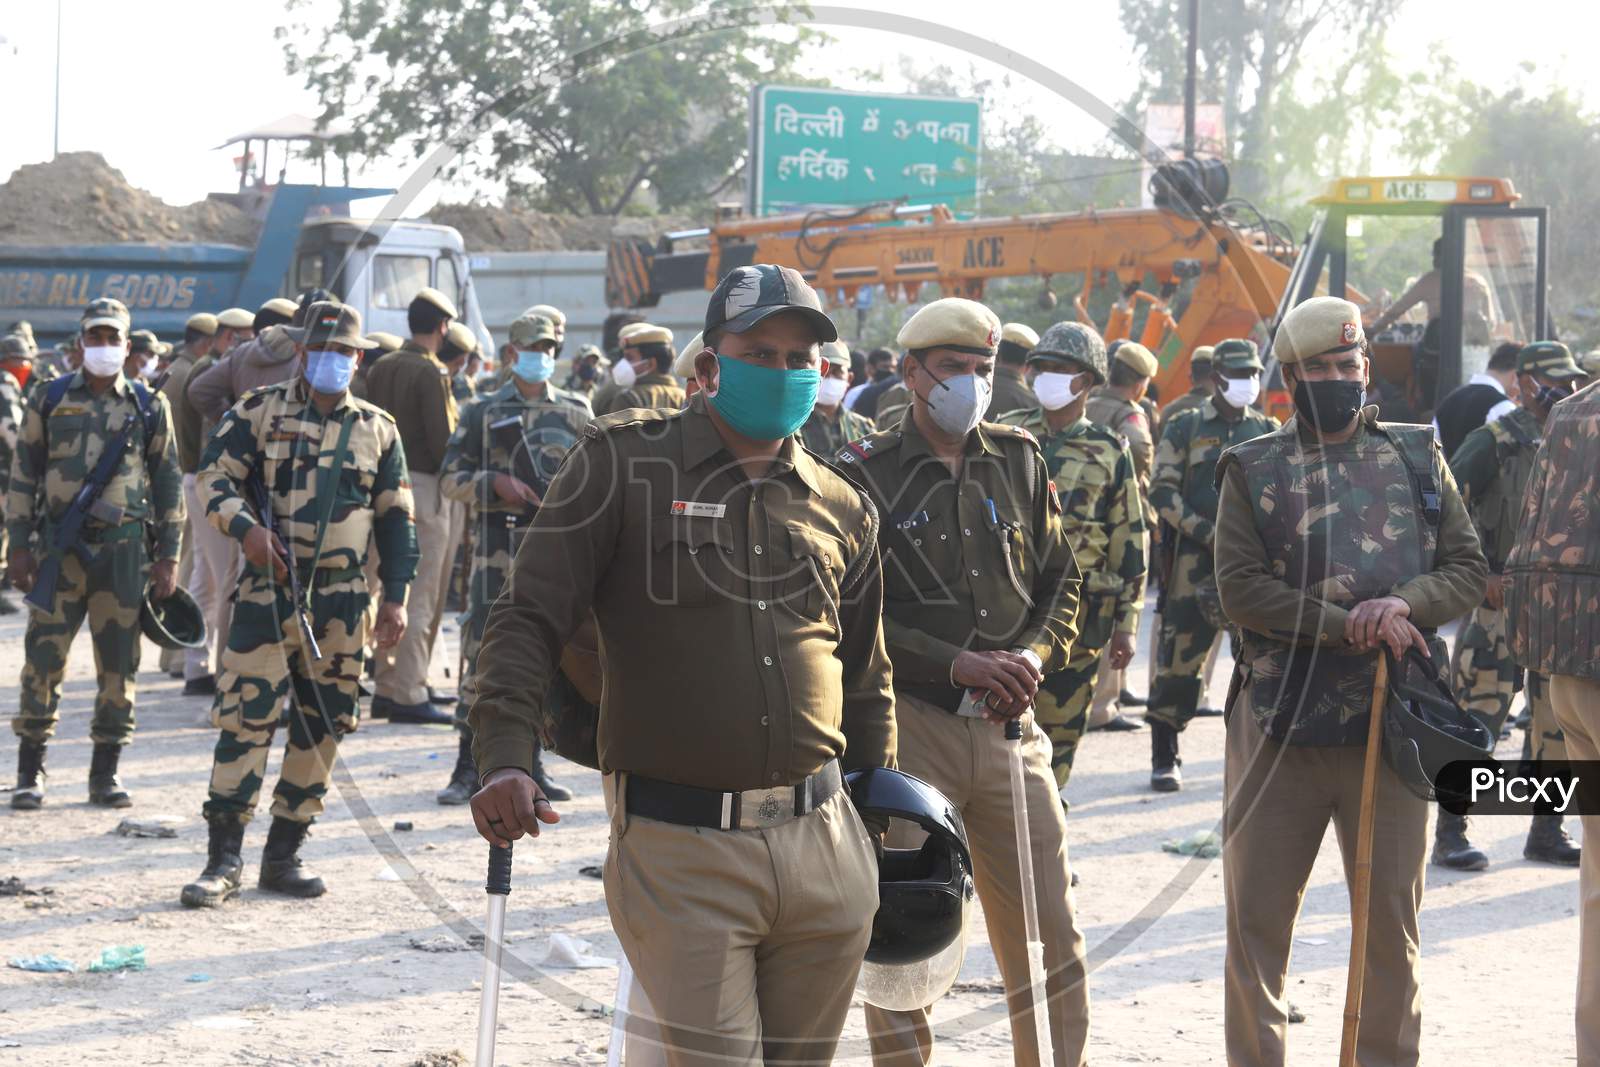 Heavy security at  Haryana-New Delhi border to stop agitating farmers. Farmers are protesting against  new farm laws that they fear will reduce their earnings and give more power to large retailers.